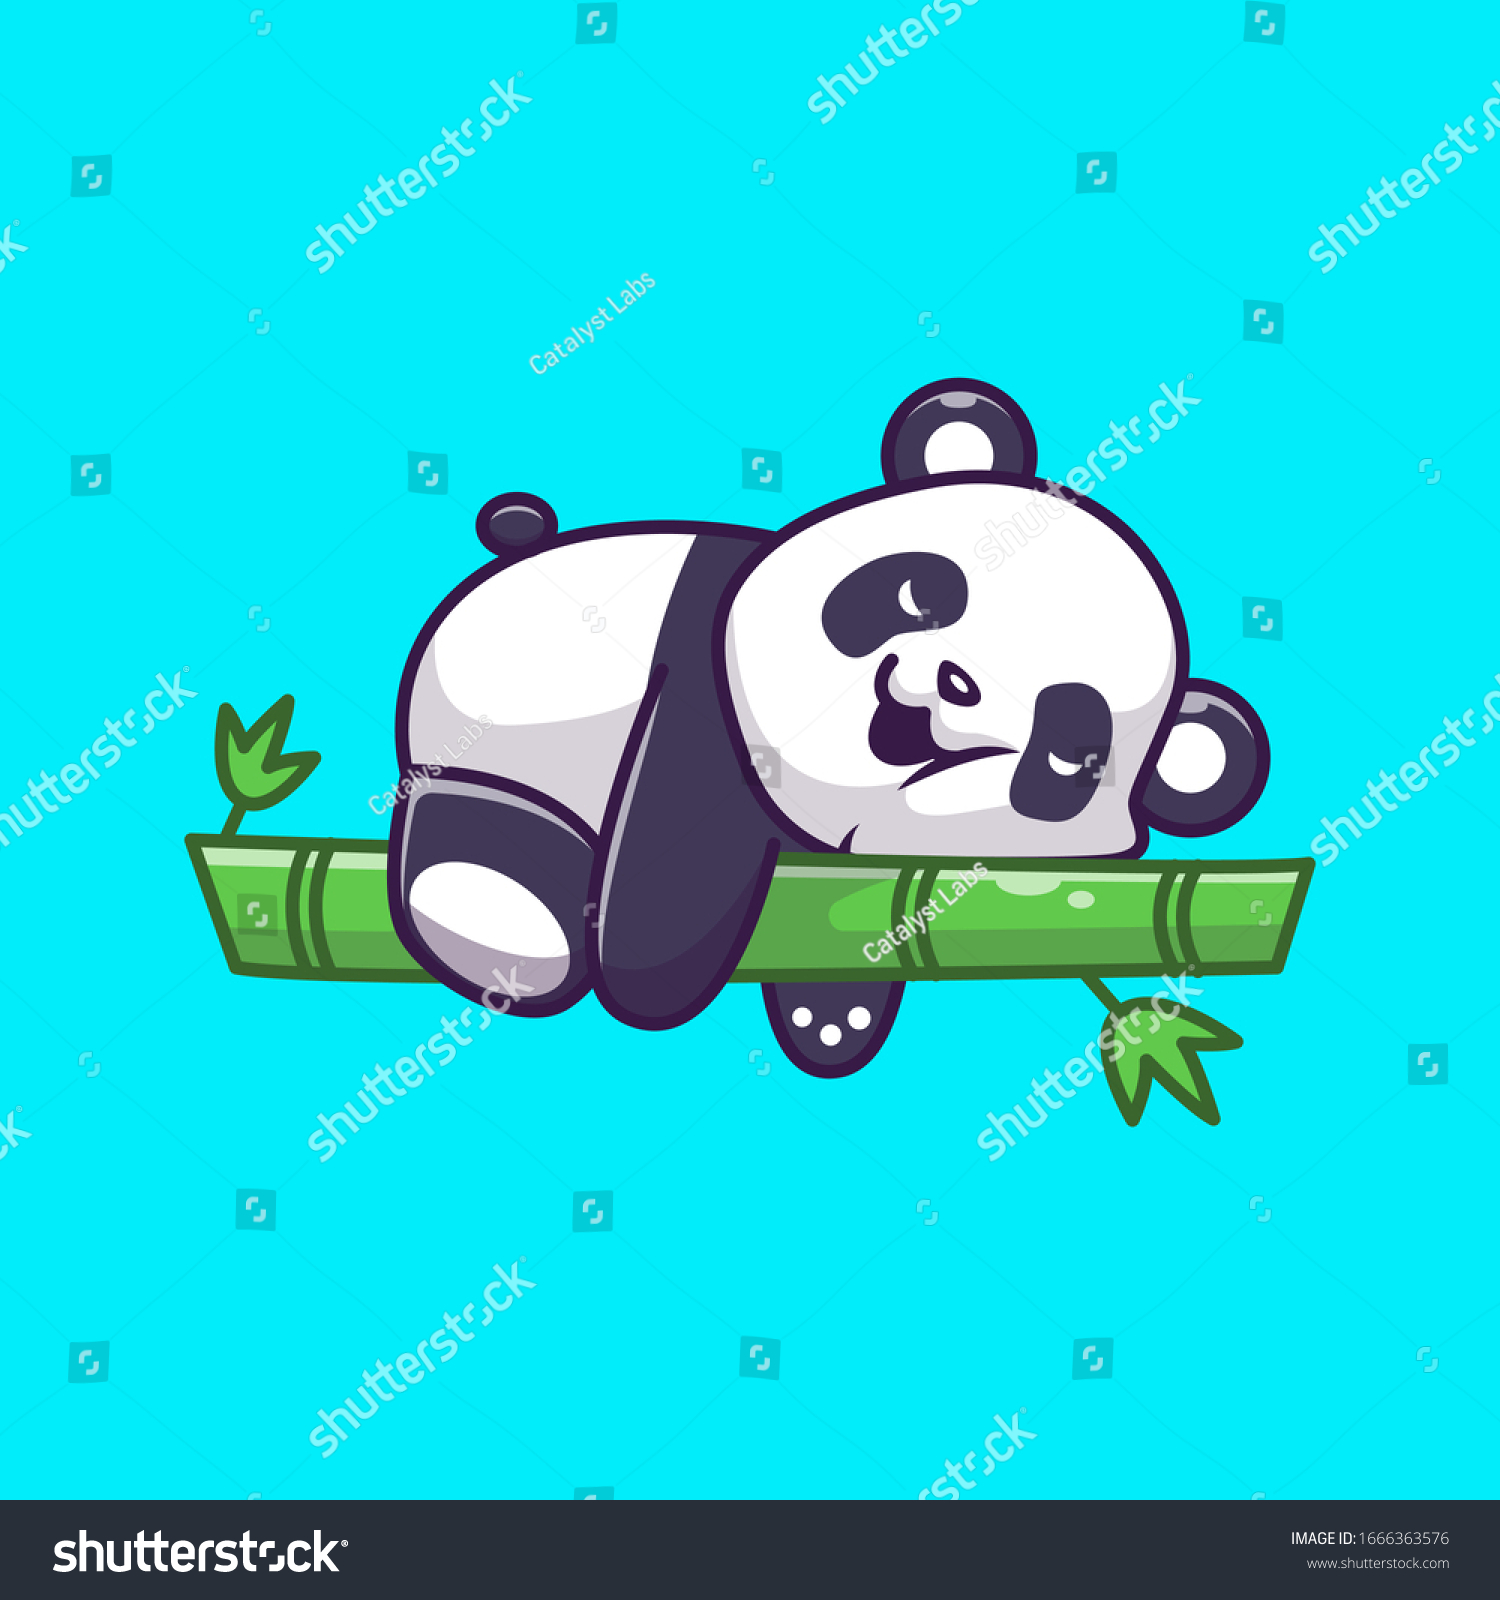 SVG of Cute Panda Sleeping Bamboo Vector Icon Illustration. Panda Mascot Cartoon Character. Animal Icon Concept White Isolated. Flat Cartoon Style Suitable for Web Landing Page, Banner, Flyer, Sticker, Card svg